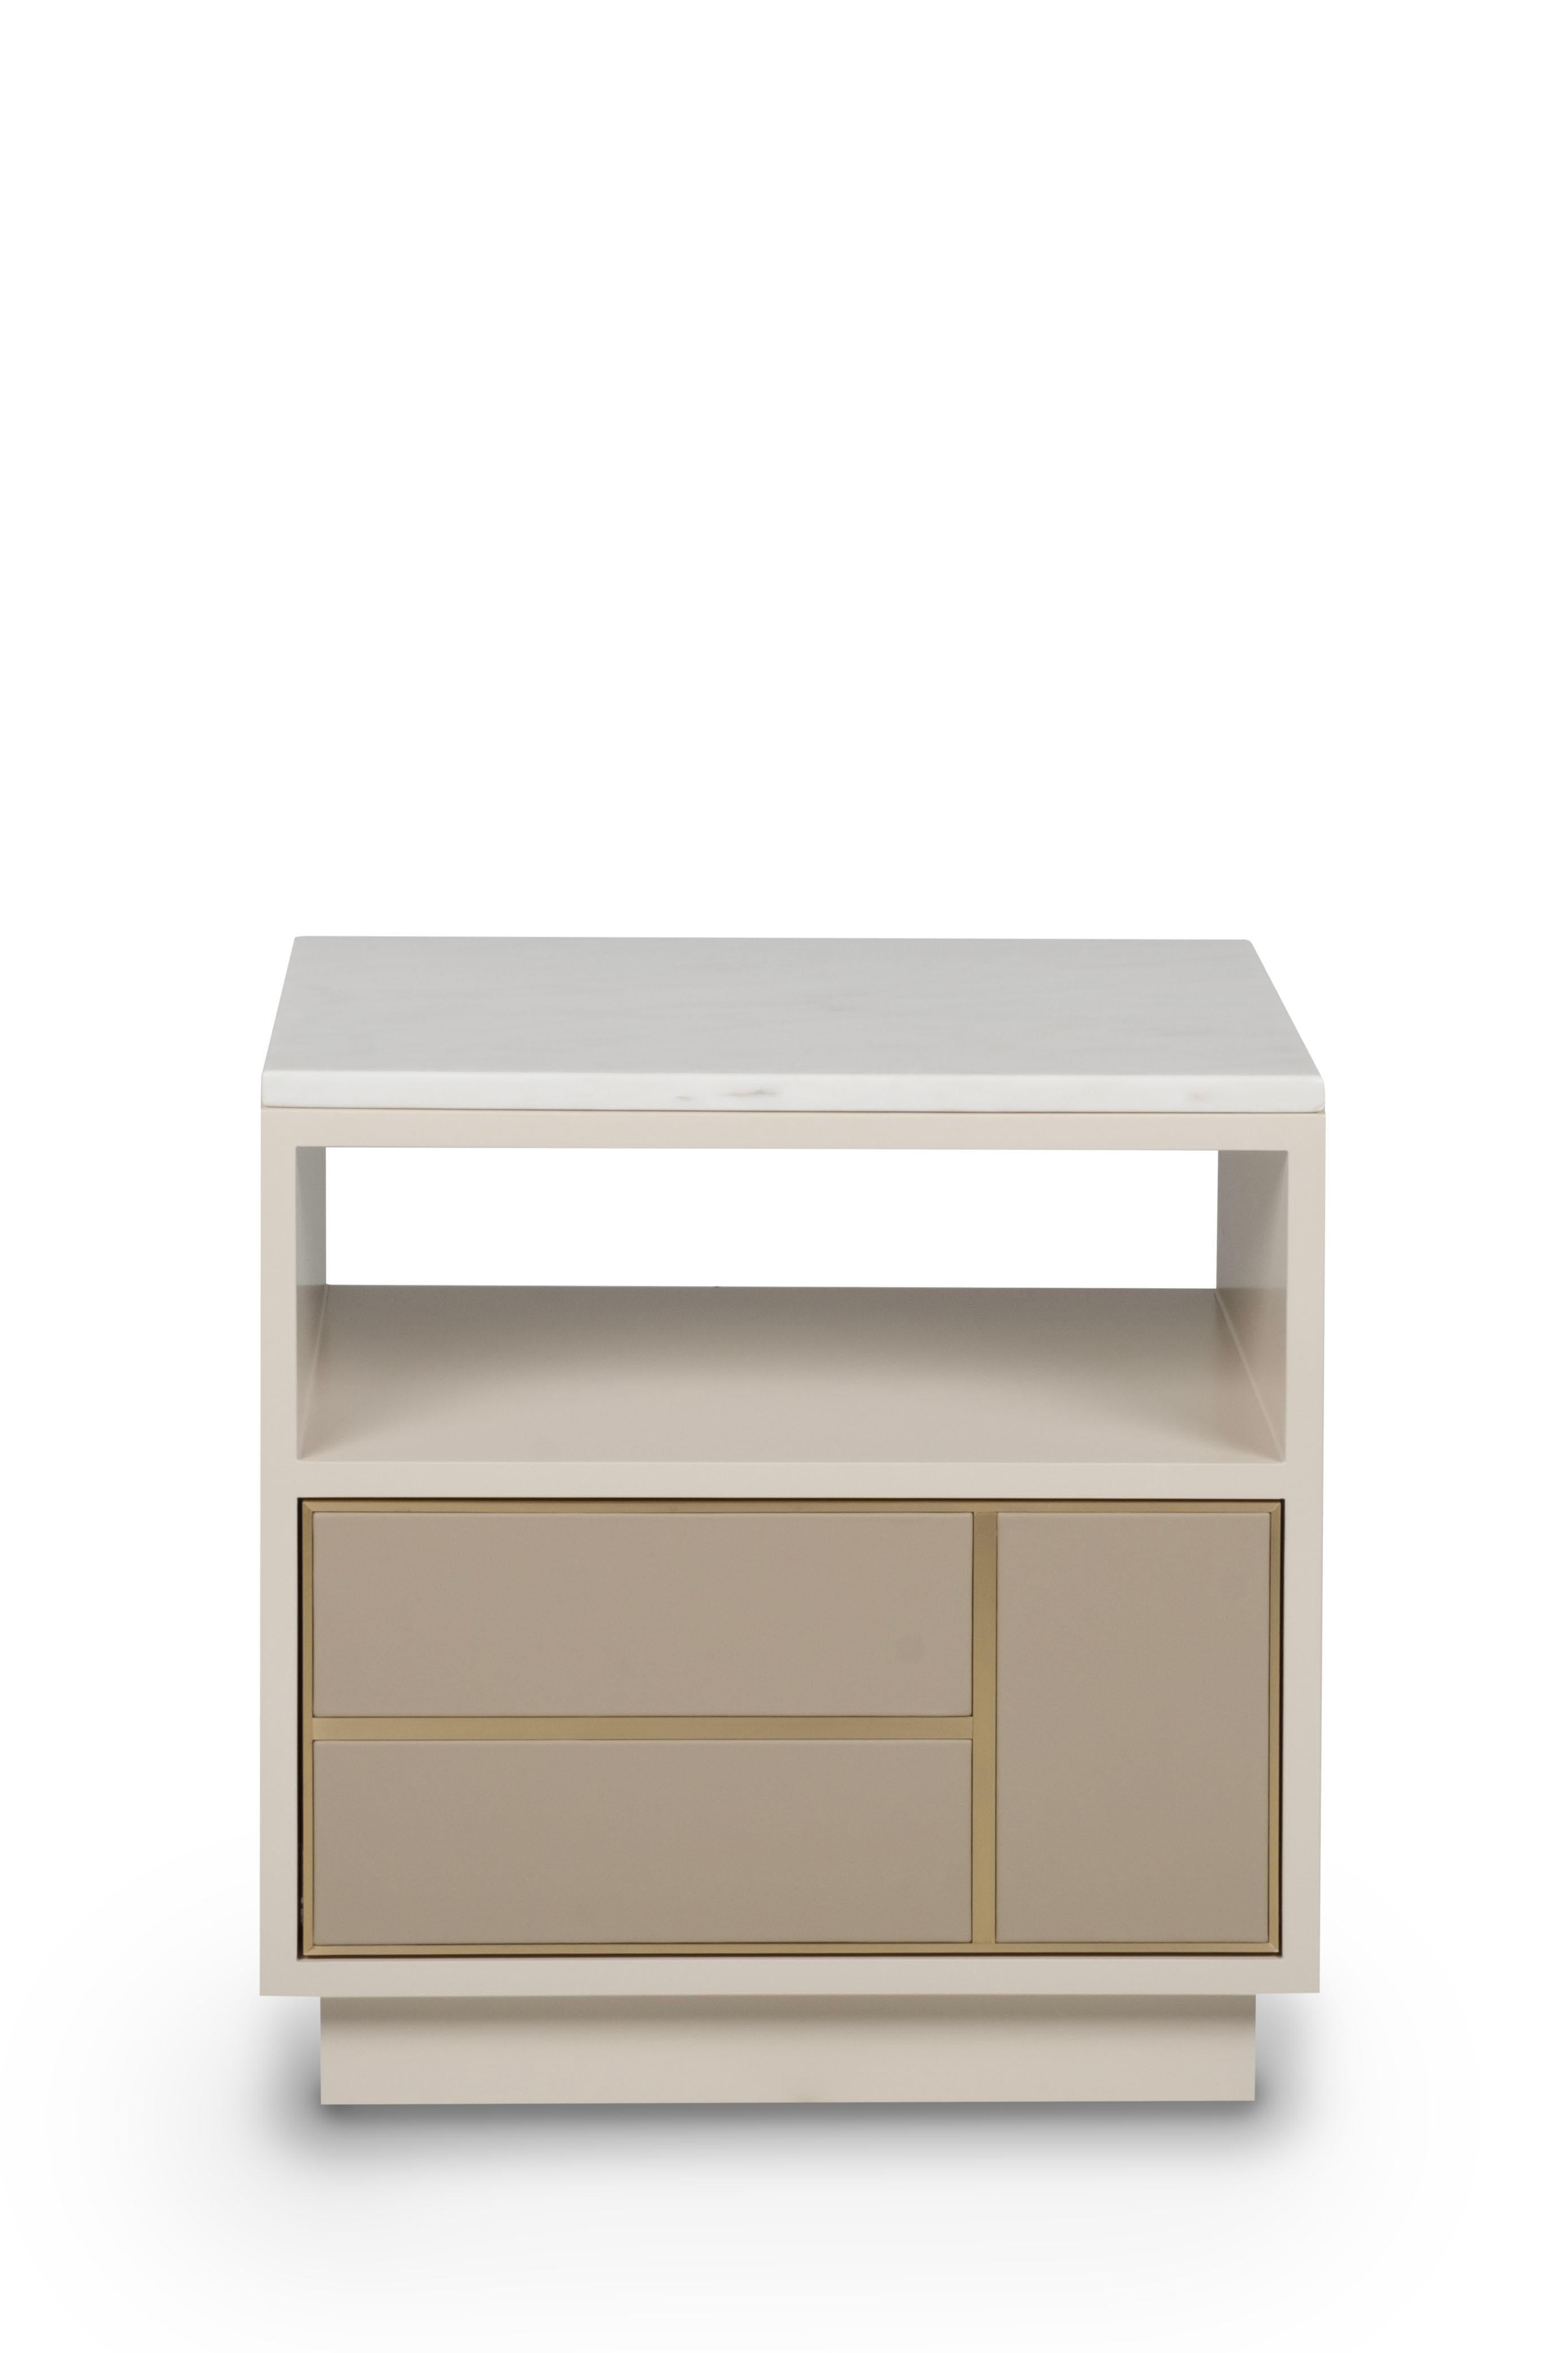 Jensen Bedside Table, Contemporary Collection, Handcrafted in Portugal - Europe by Greenapple.

The Jensen bedside table offers a timeless design for your comfort zone. Jensen is a beige wooden bedside table, designed to enhance the room. The drawer